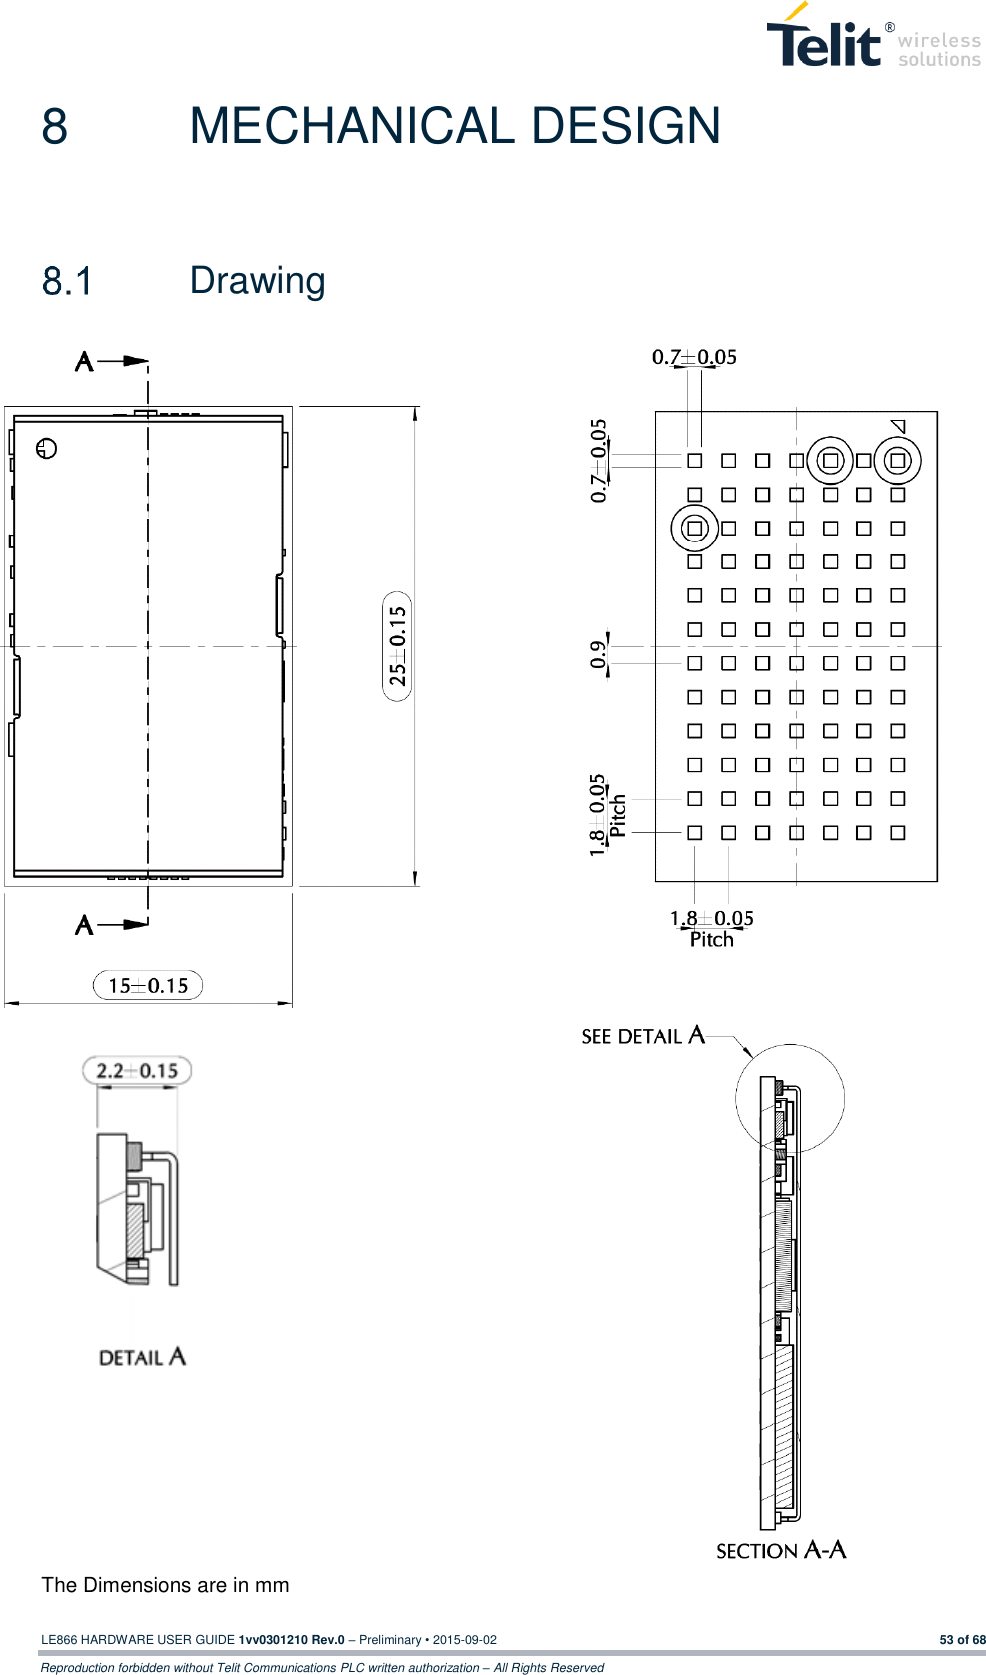  LE866 HARDWARE USER GUIDE 1vv0301210 Rev.0 – Preliminary • 2015-09-02 53 of 68 Reproduction forbidden without Telit Communications PLC written authorization – All Rights Reserved 8  MECHANICAL DESIGN   Drawing                  The Dimensions are in mm  